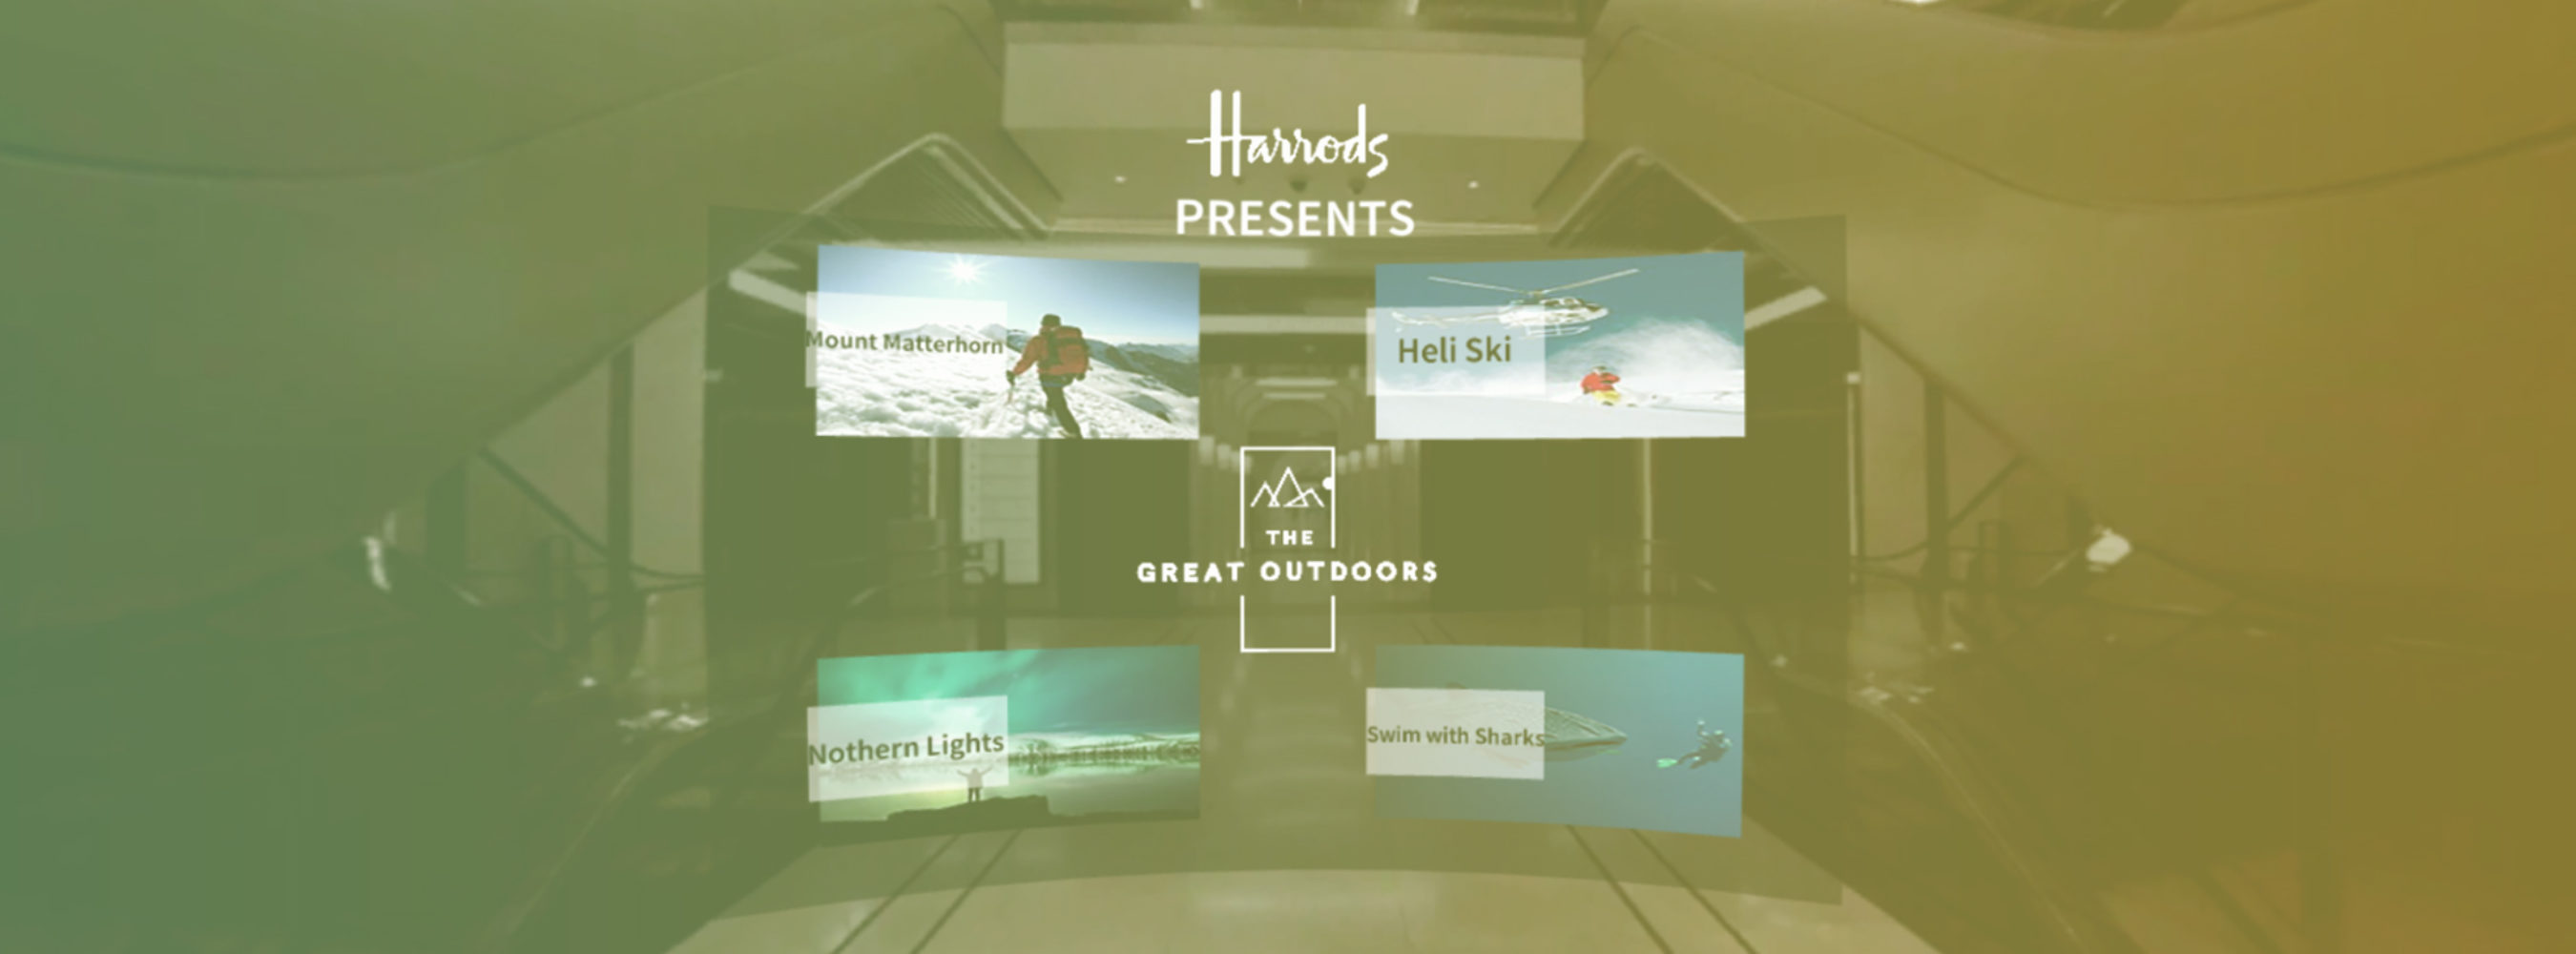 Harrods – The Great Outdoors with Oculus